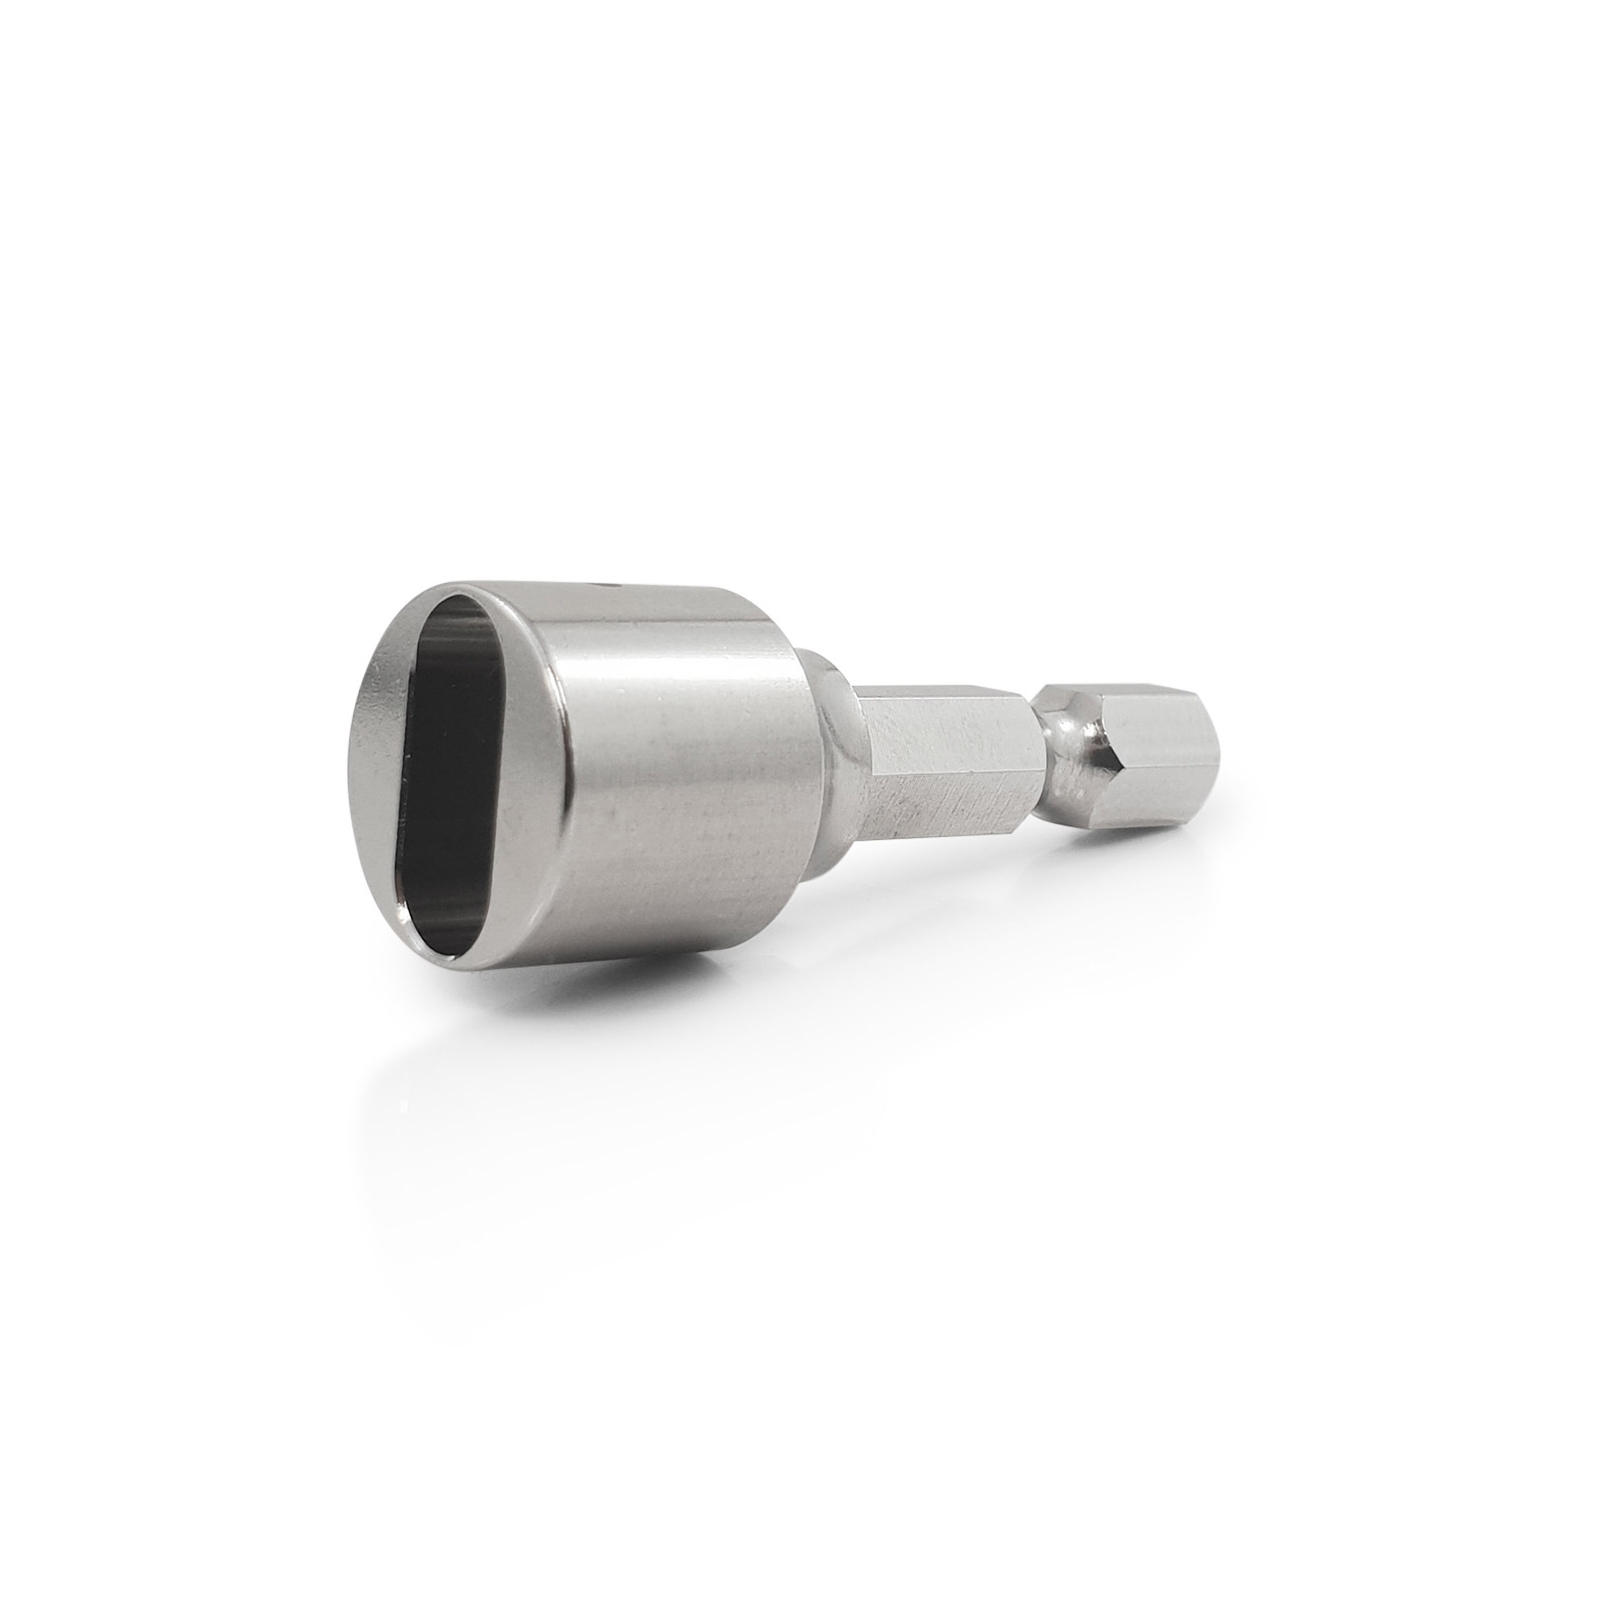 Driver Bit for Screw Eyes Stainless Steel 304